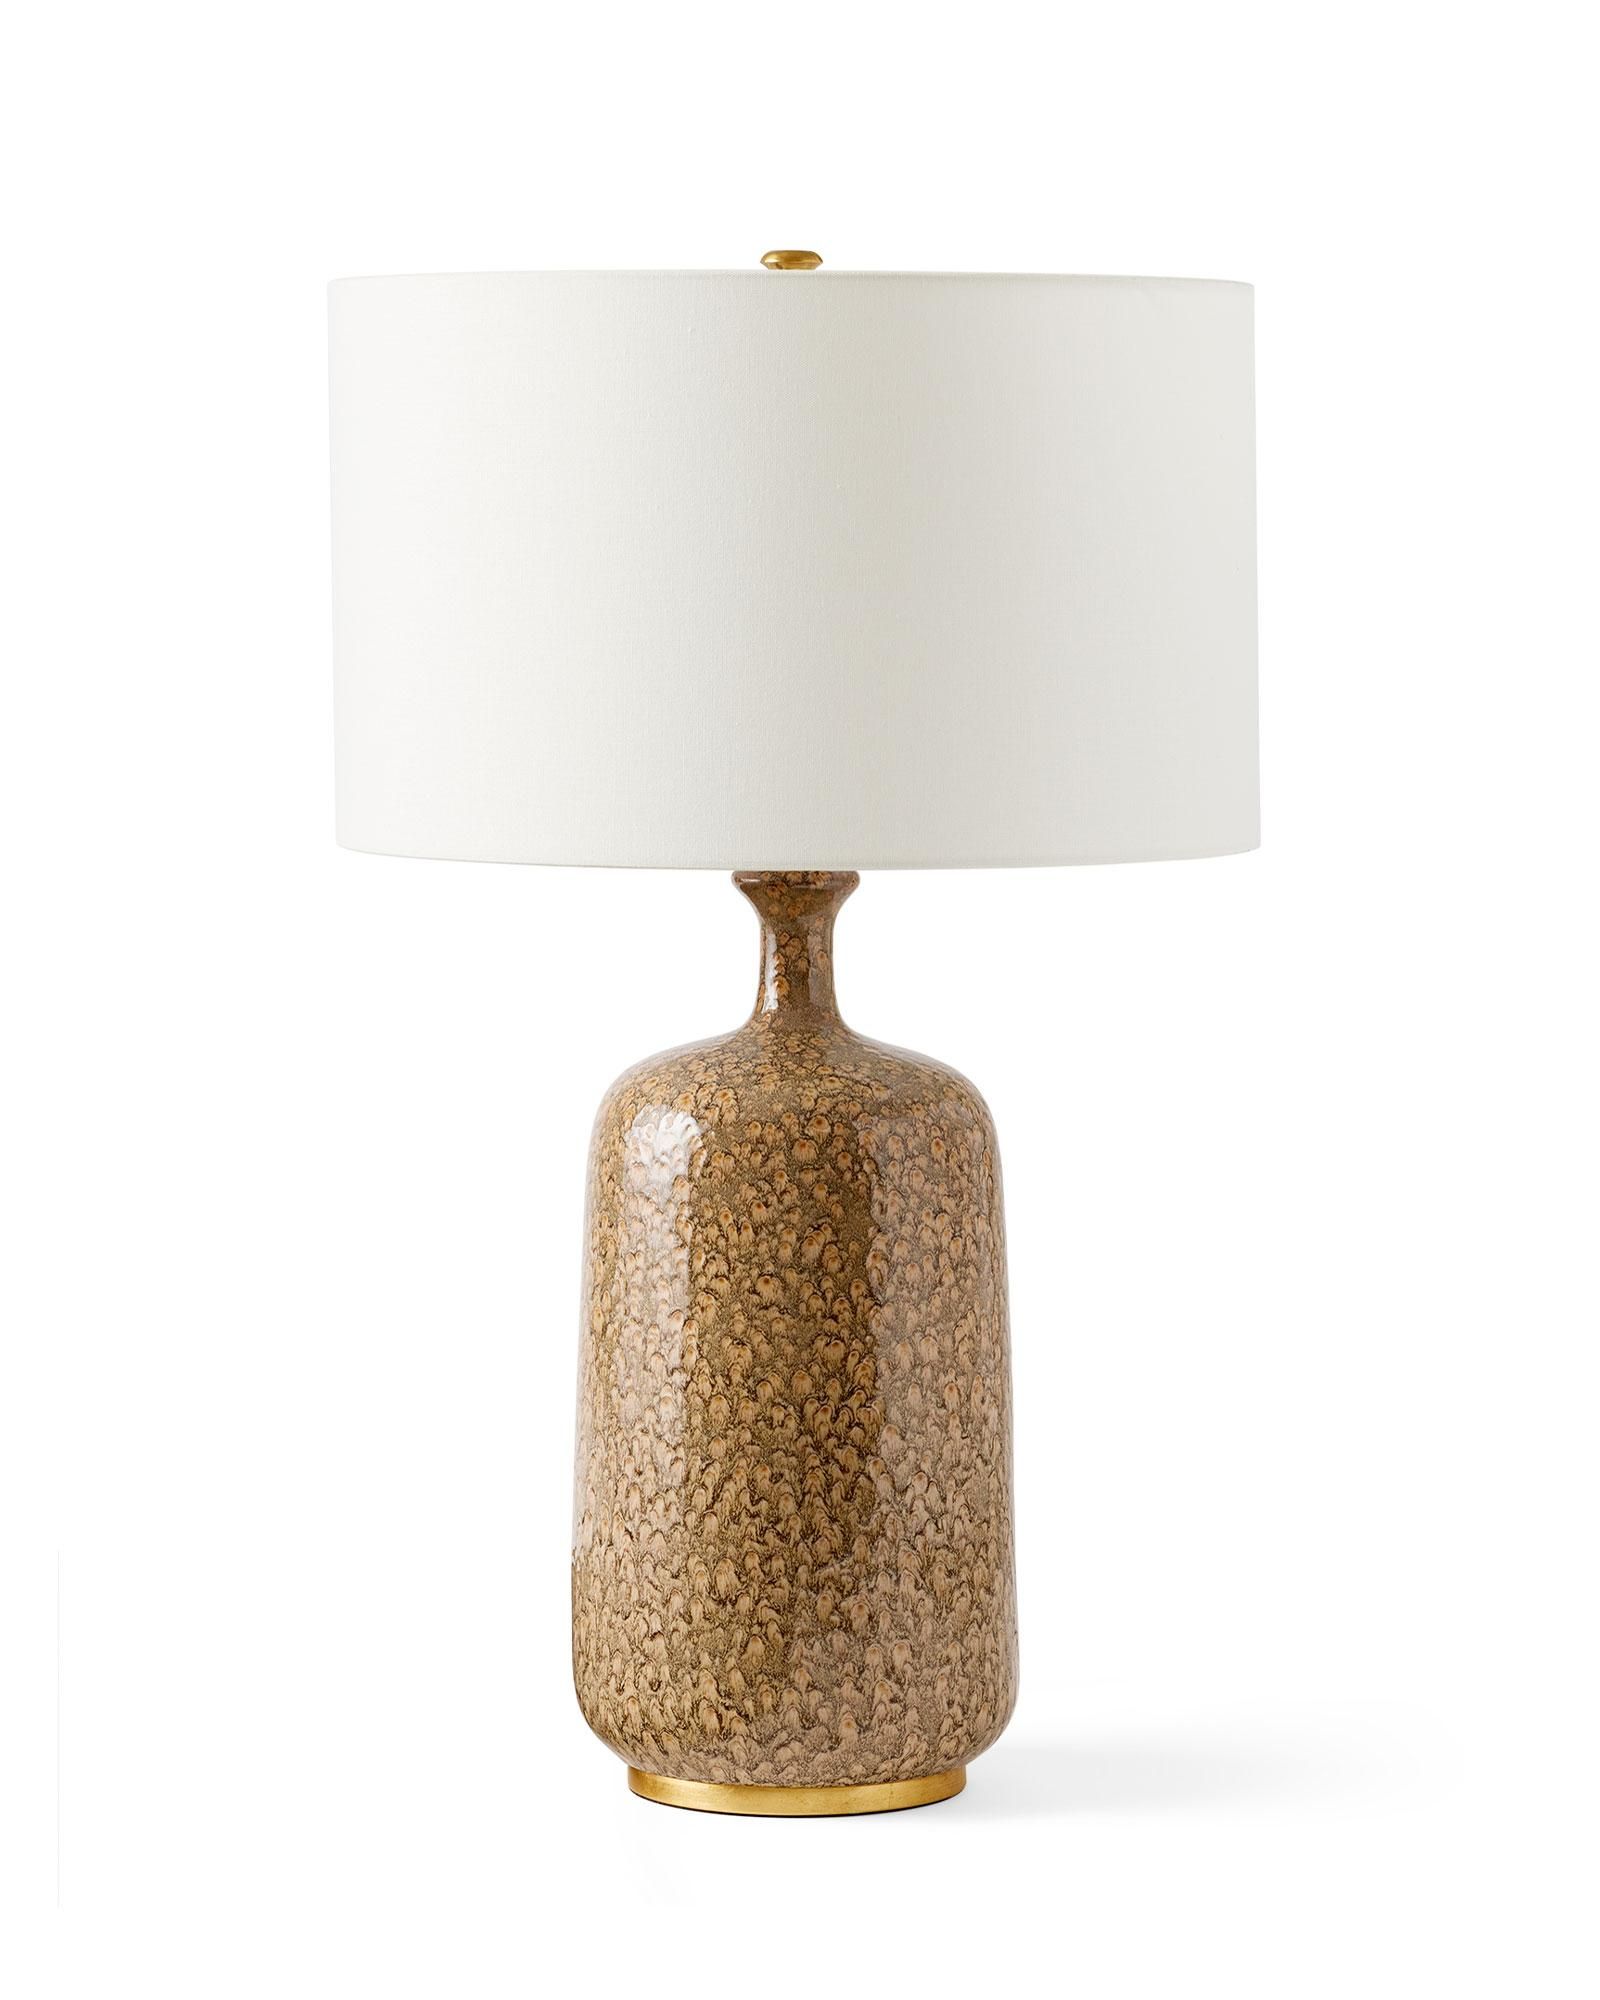 Hattie Table Lamp | Serena and Lily